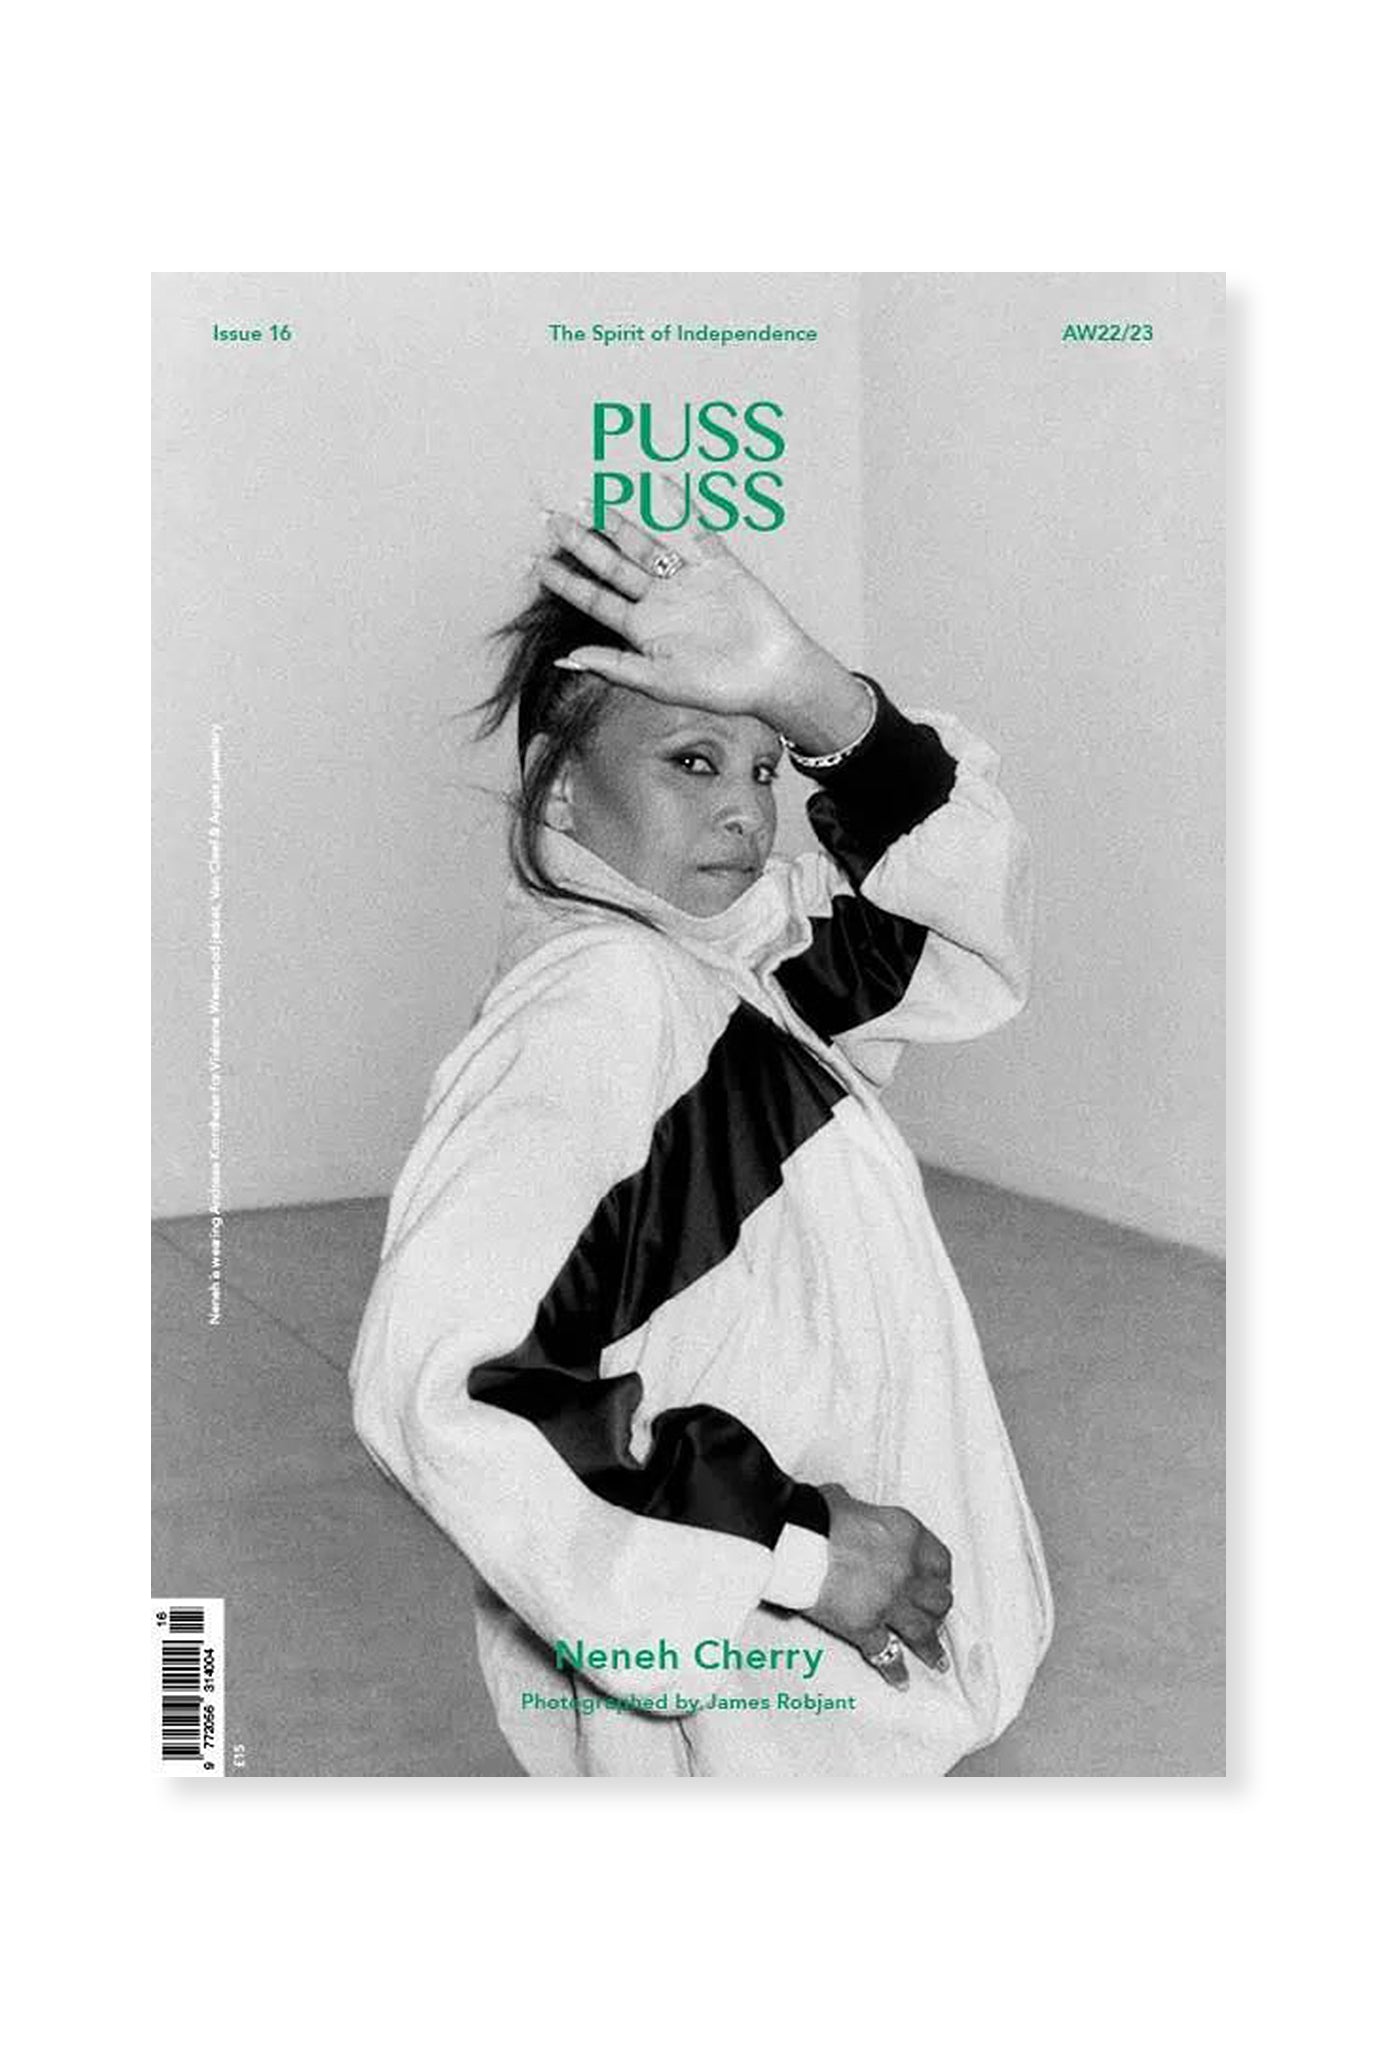 Puss Puss, Issue 16